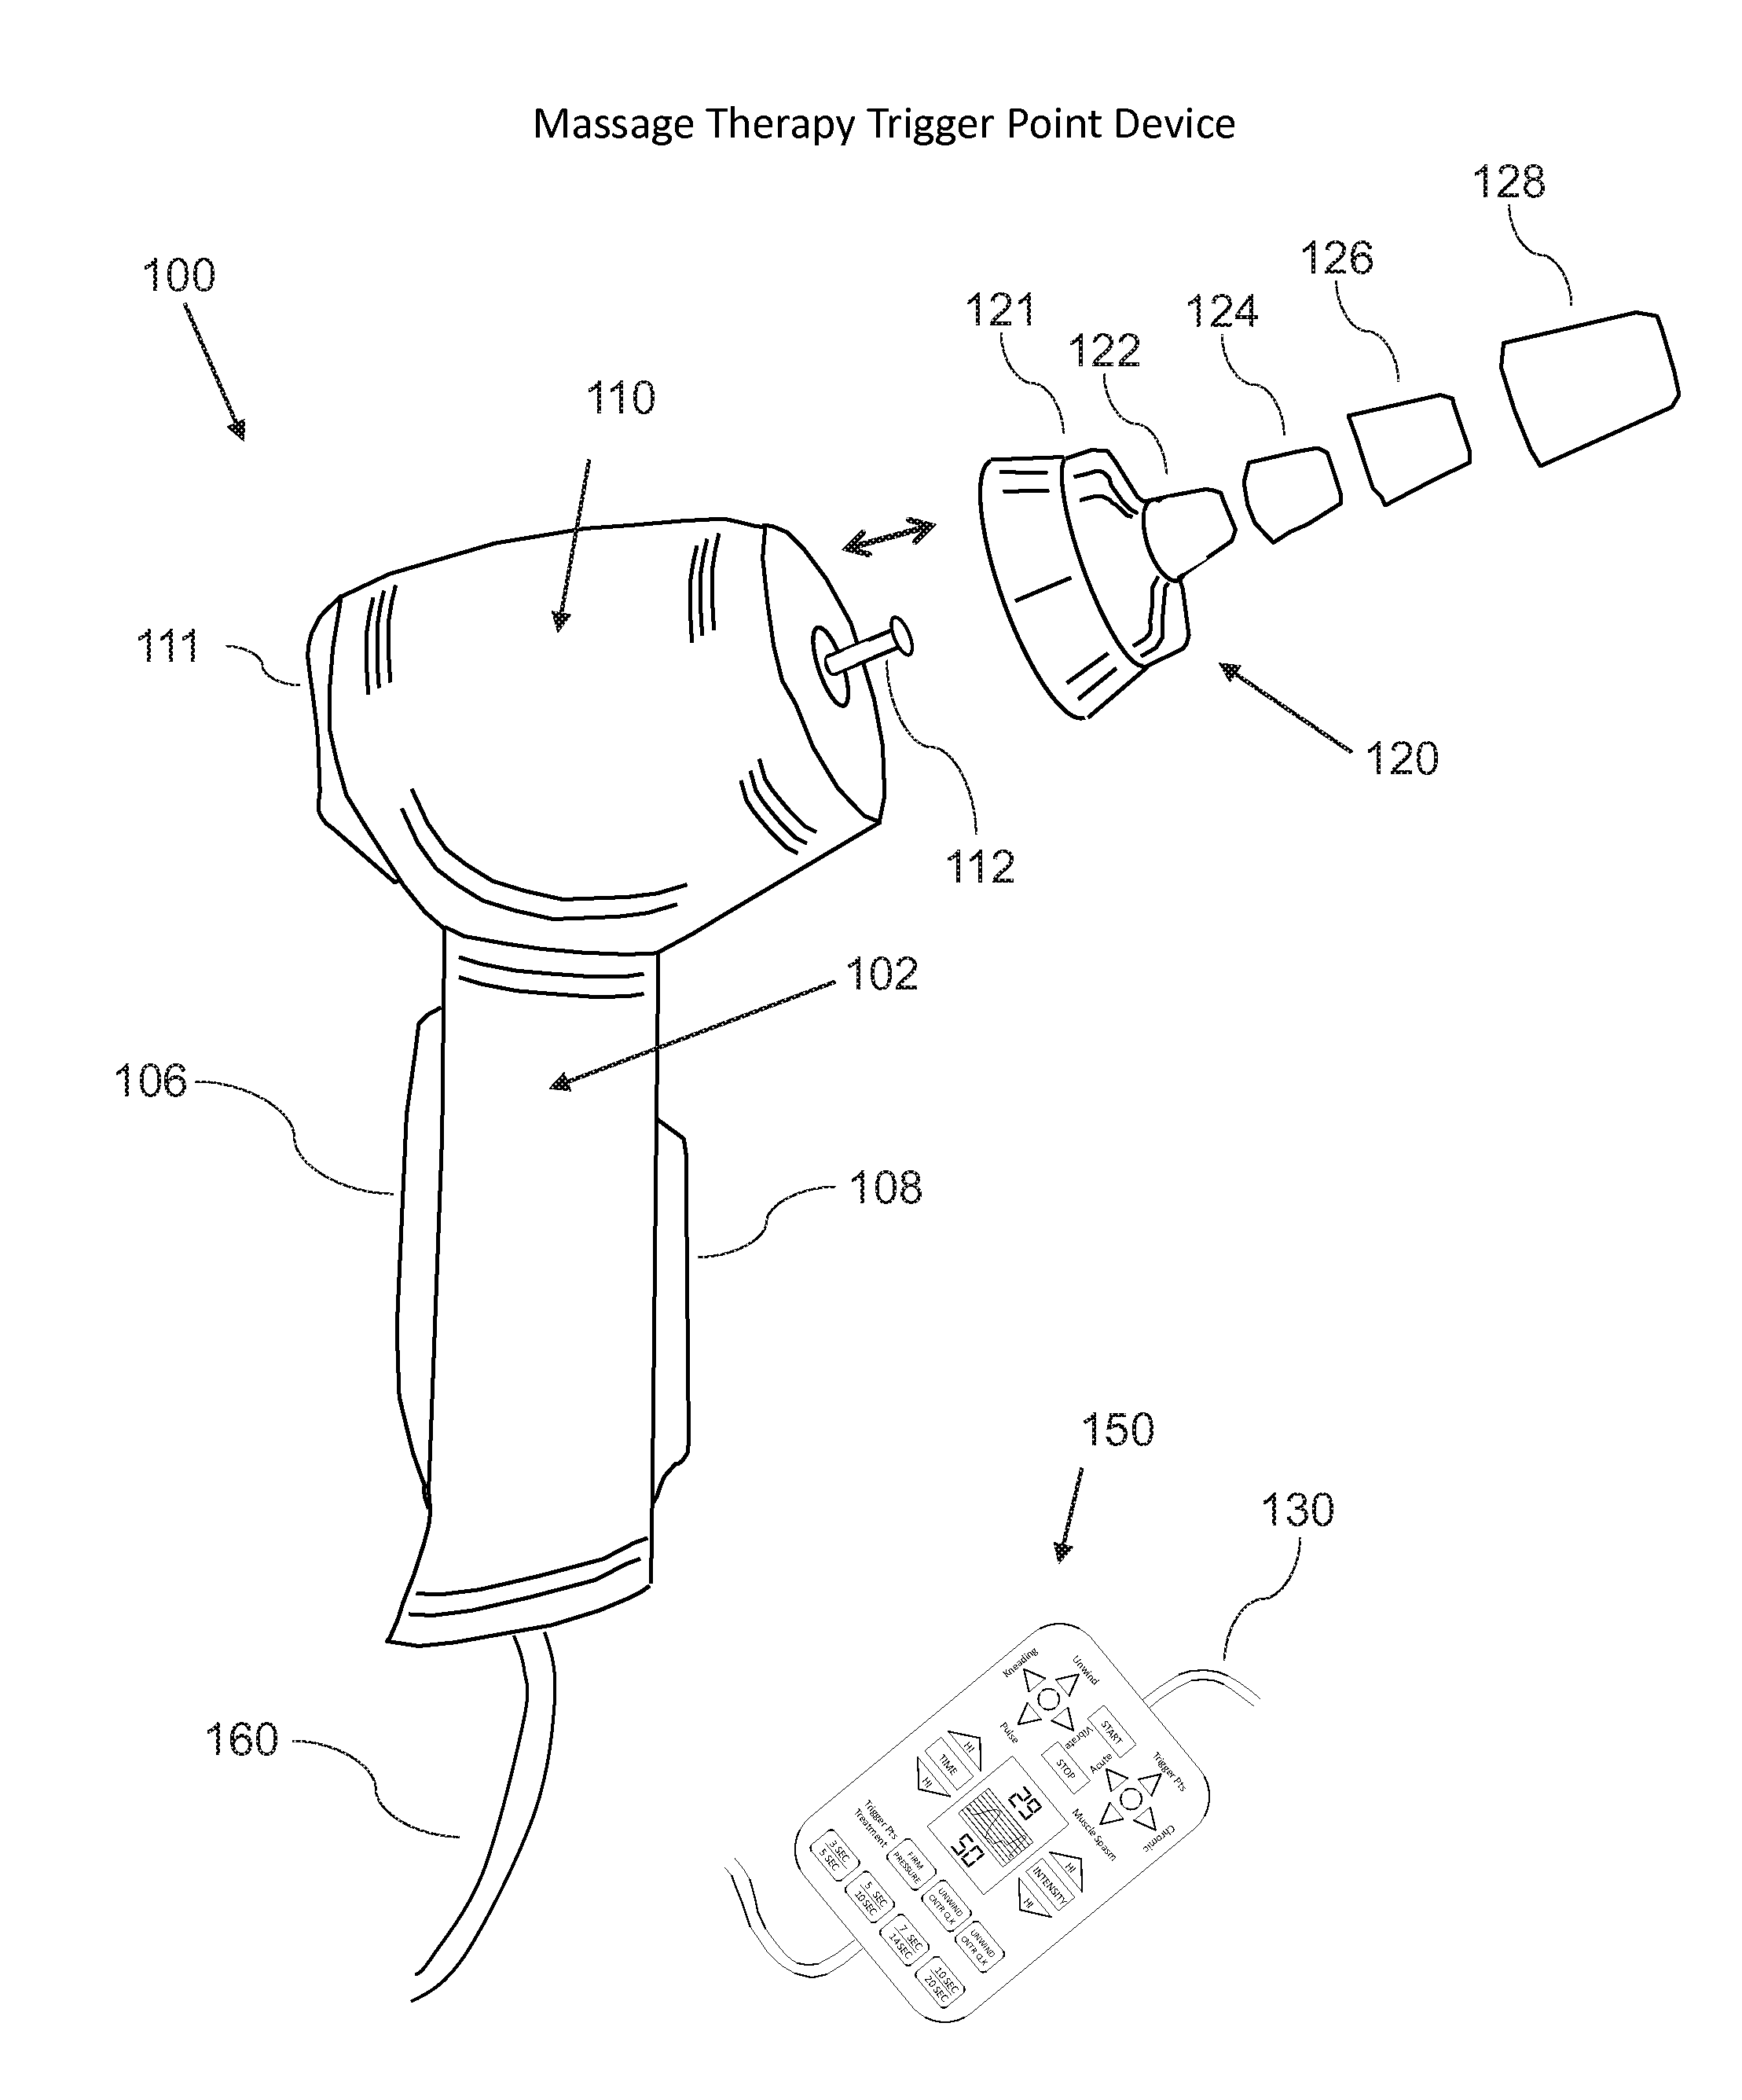 Device and method for trigger point massage therapy